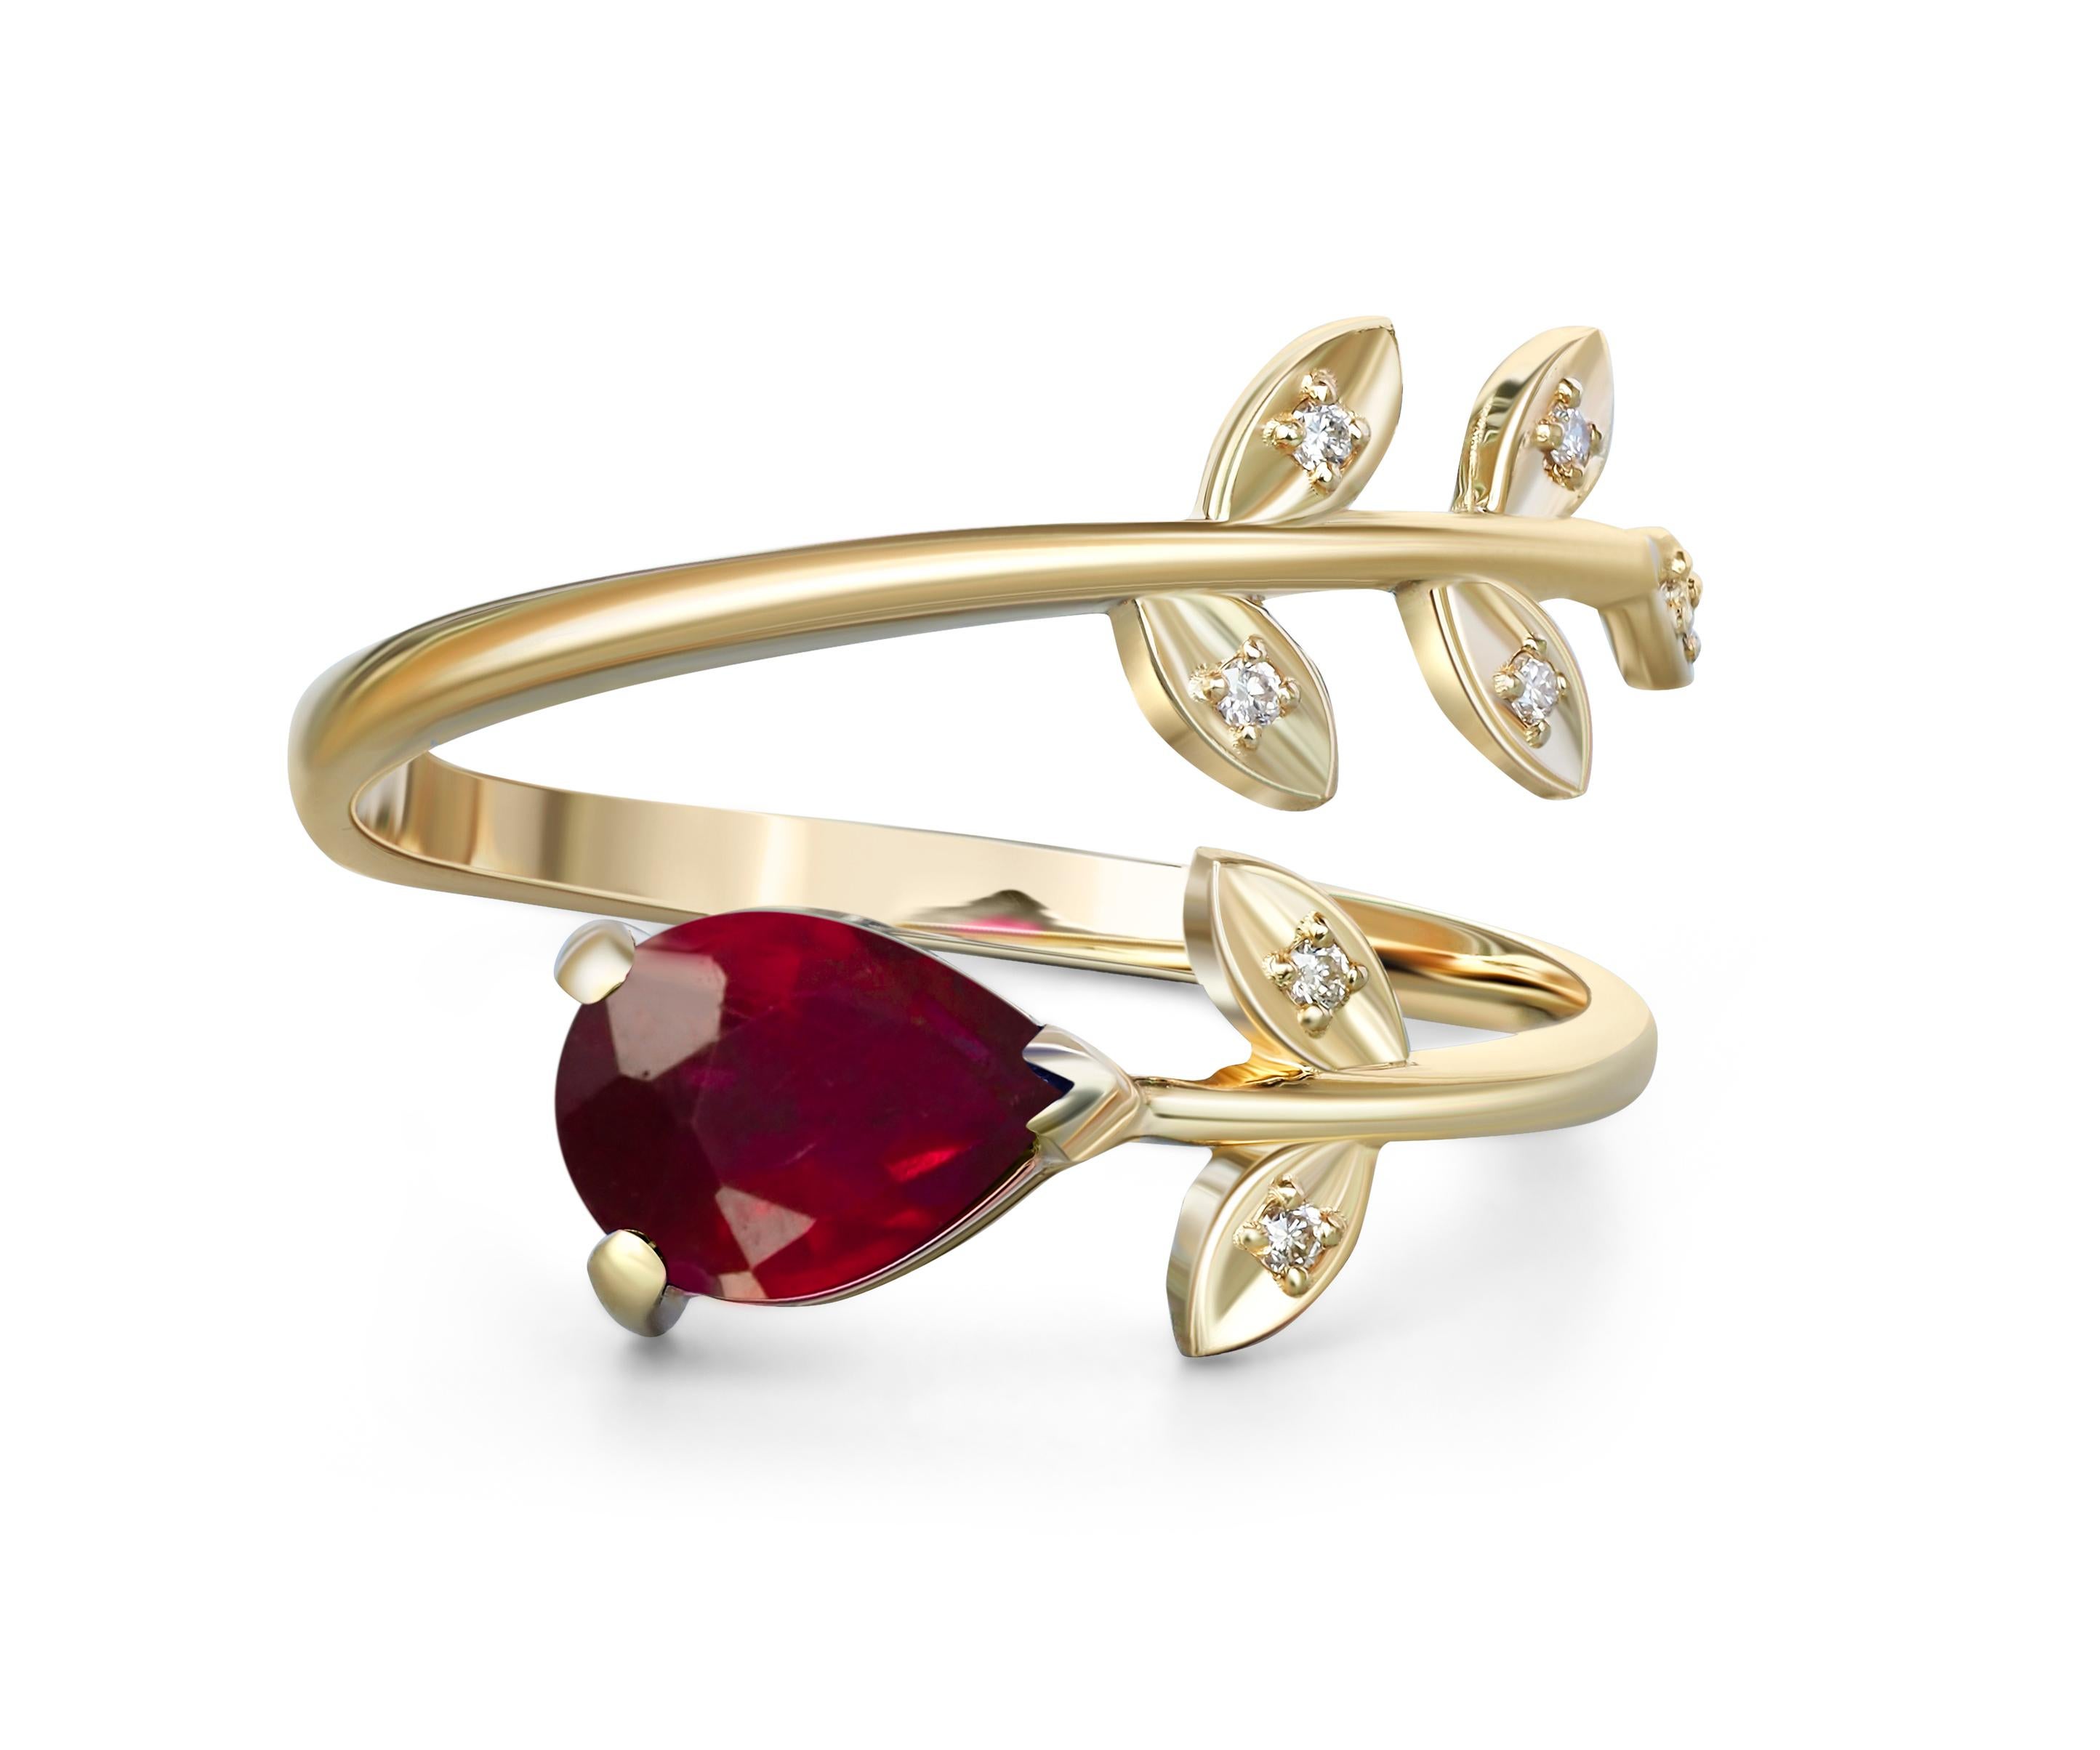 Pear ruby 14k gold ring. 
Ruby gold ring. Genuine ruby ring. Gold leaves ring. Ruby berry ring. Floral gold ring. Delicate gold ring.

Metal: 14 k gold
Weight: 2 g. depends from size.

Set with ruby: pear shape, approx 0.8 ct, red color.
Clarity: